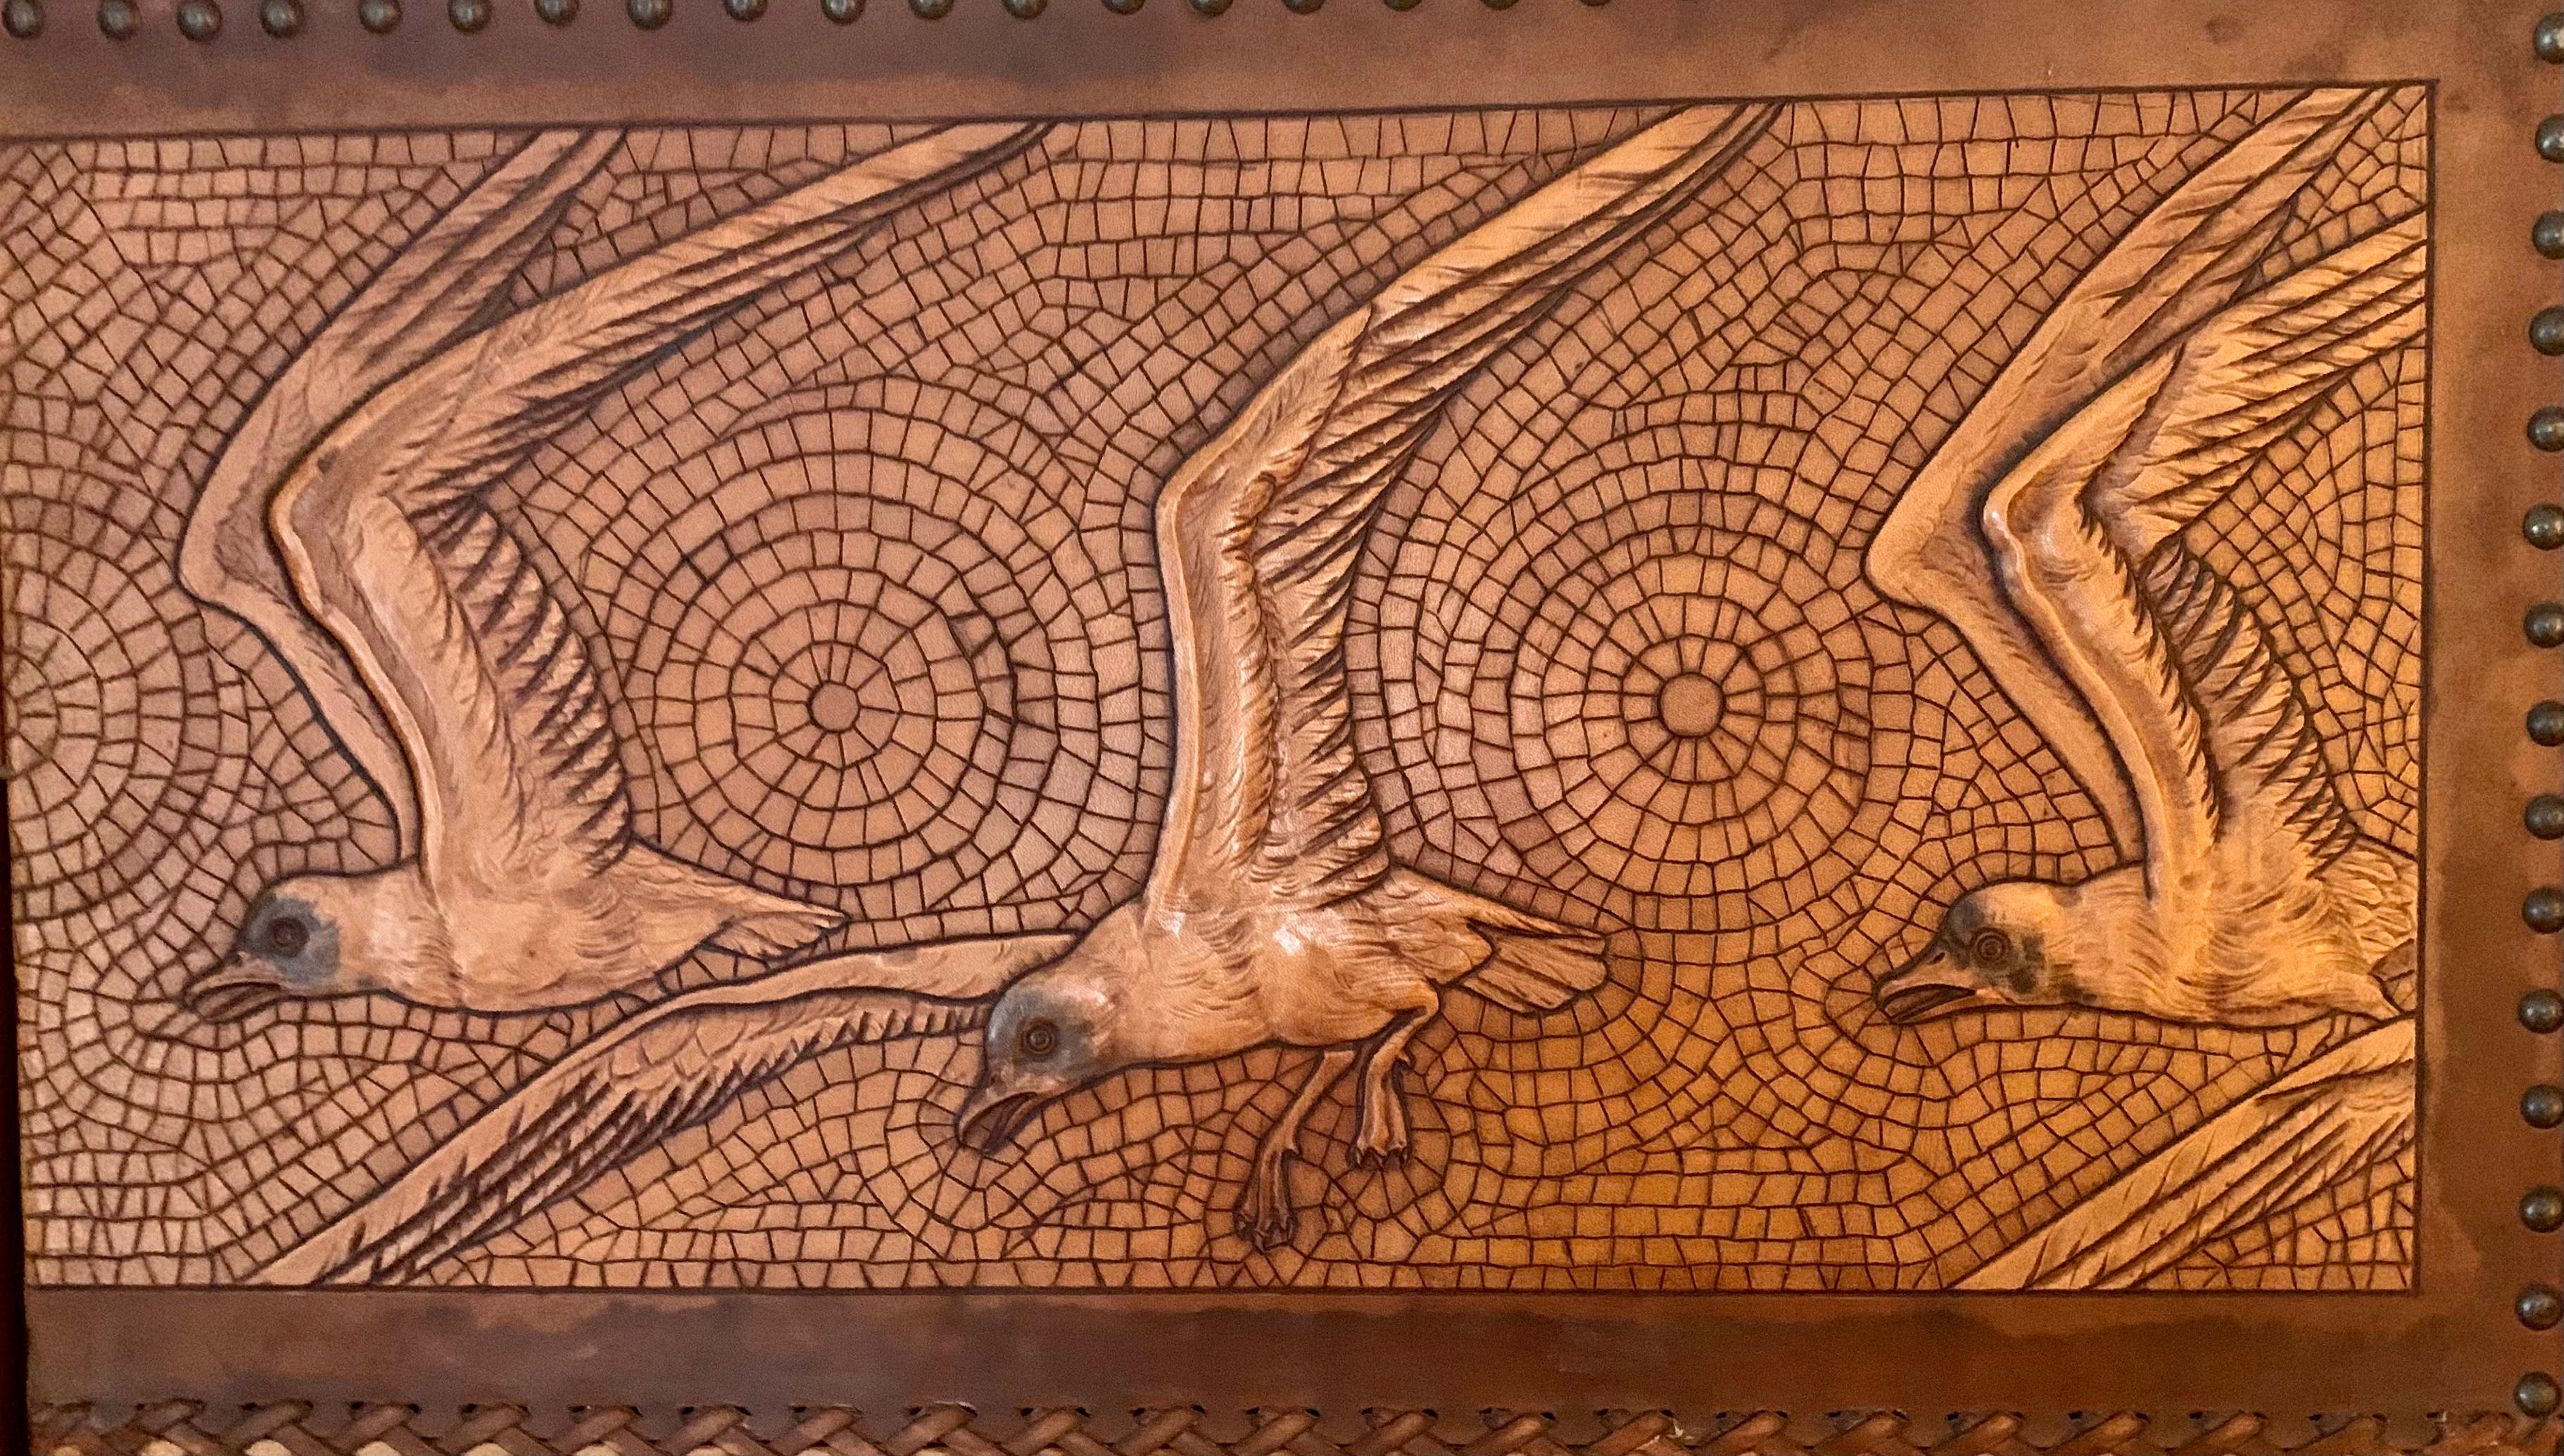 Large Georg Hulbe Art Nouveau tooled leather three panel screen
The central panels featuring a Sailing motif with superbly detailed tooled leather seagulls upper panels and classic Art Nouveau design elements at the base. 
References: an identical